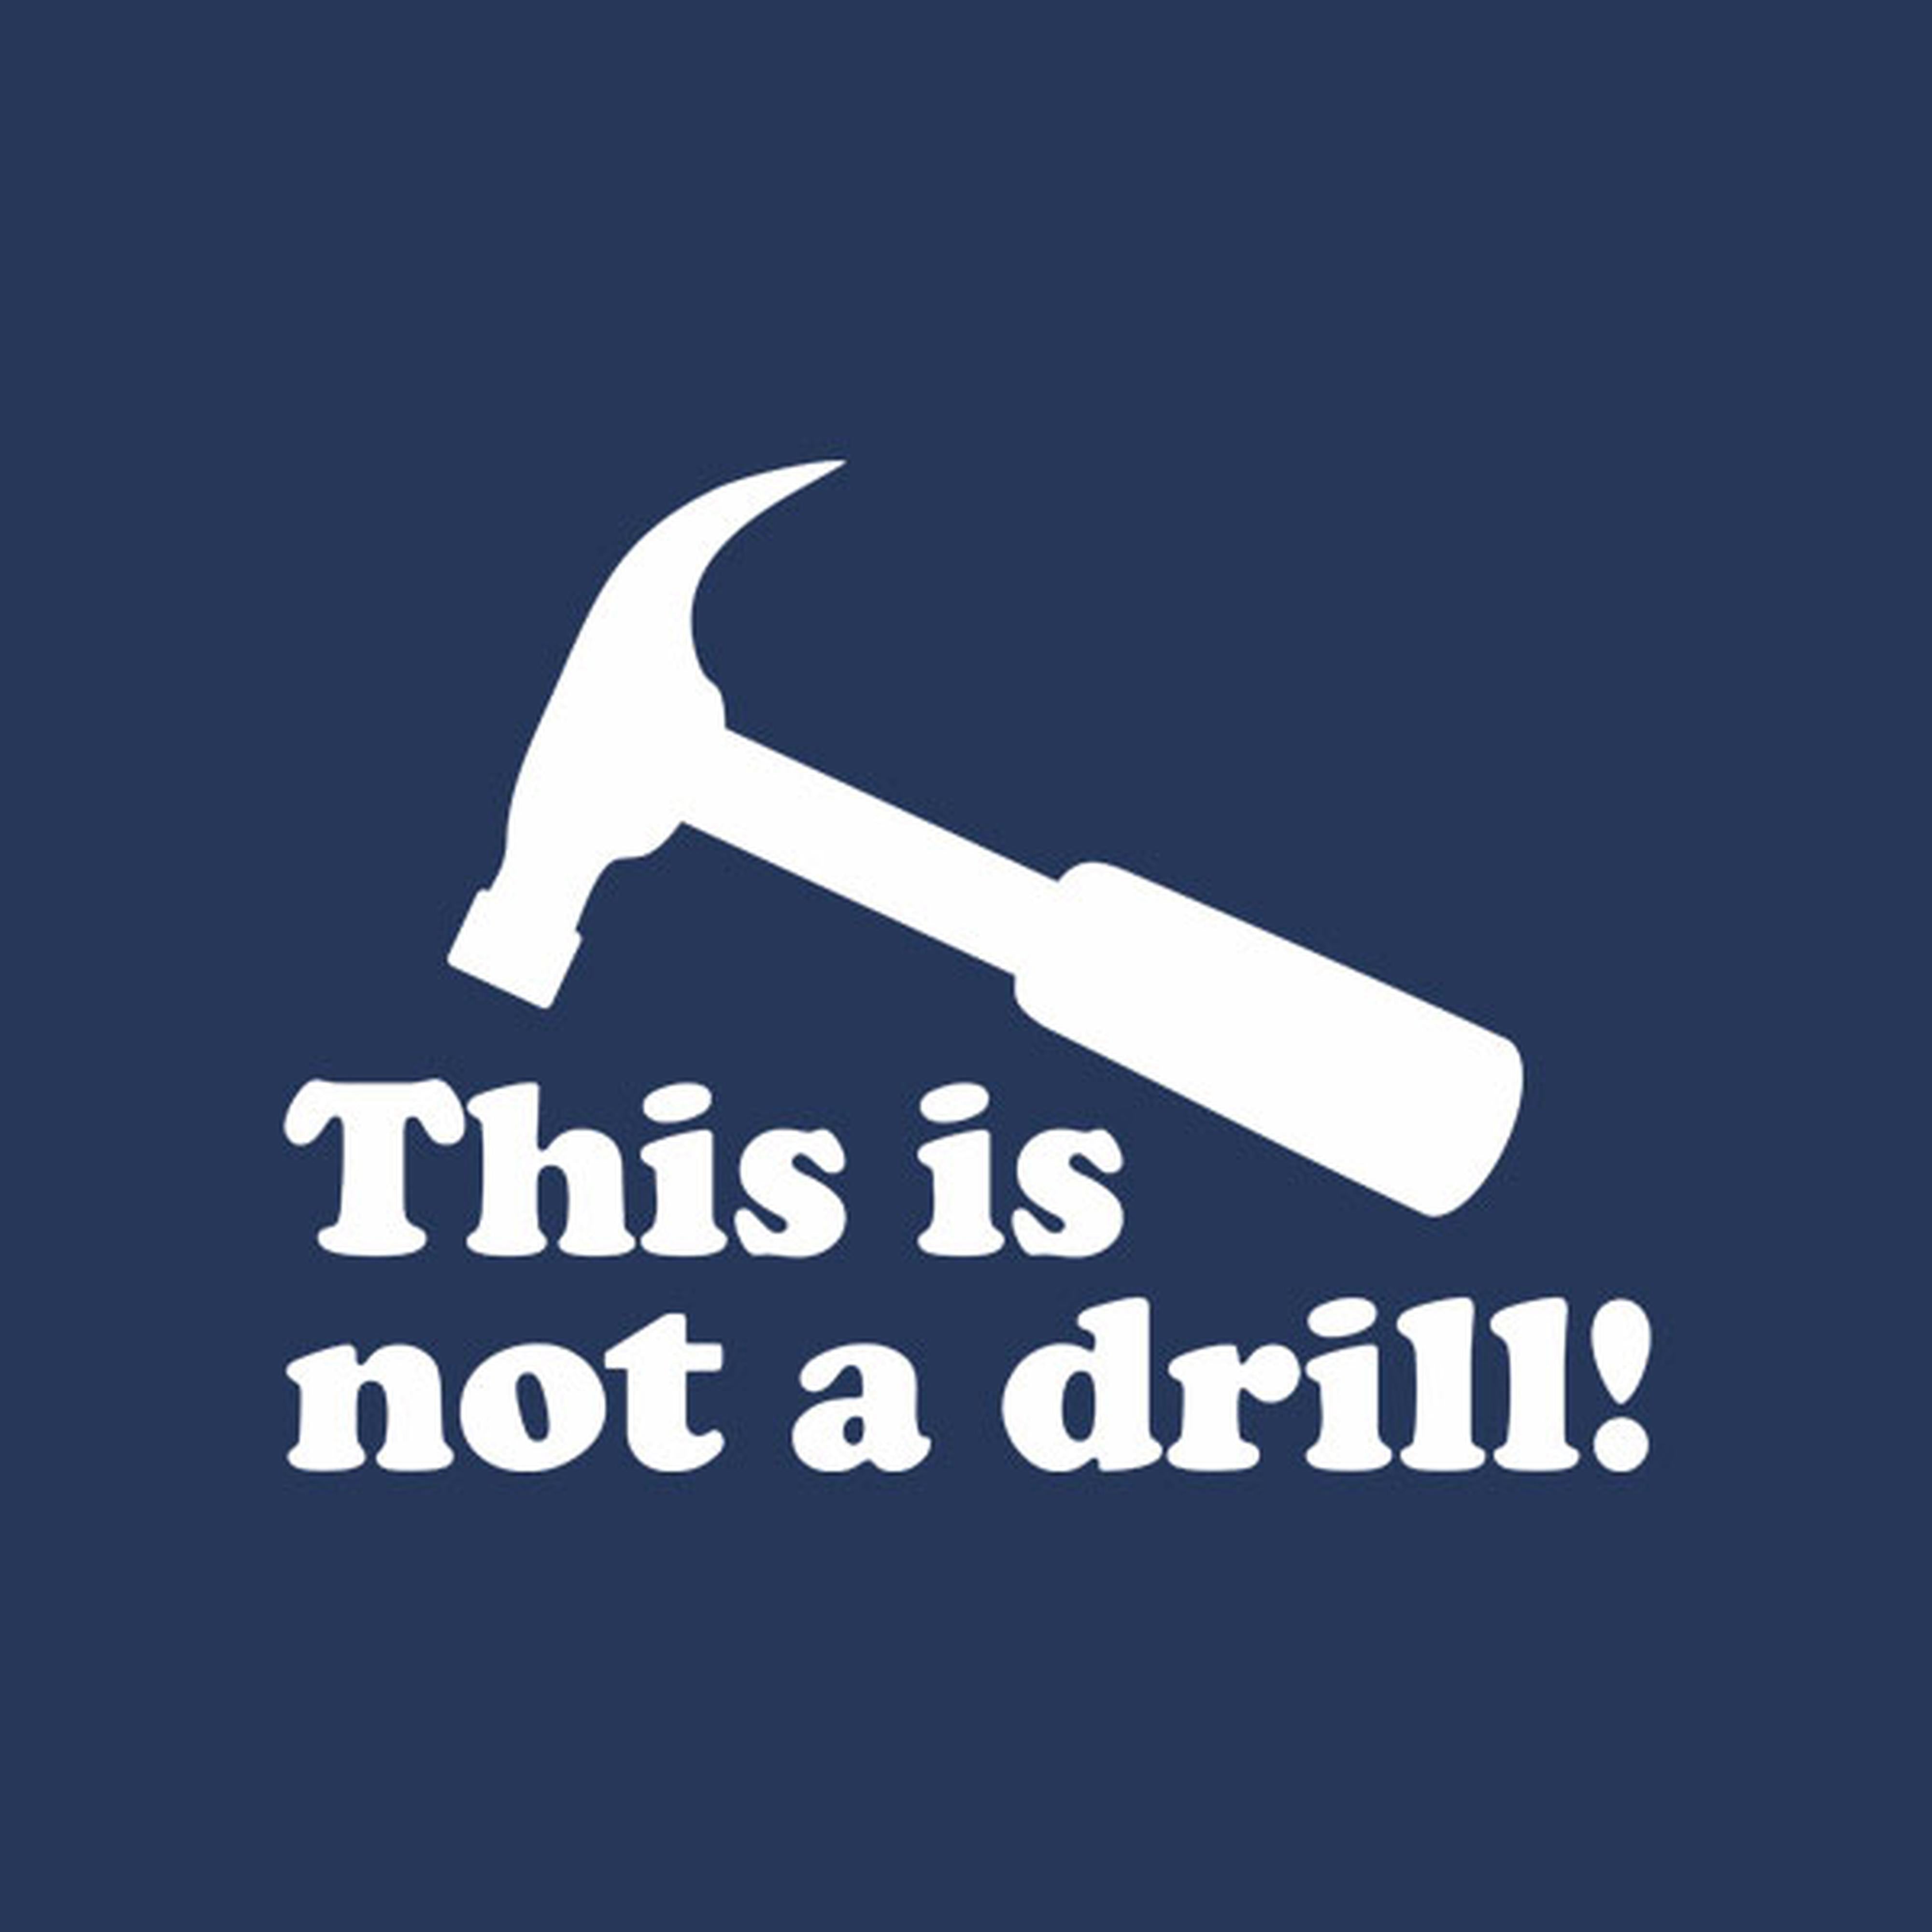 This is not a drill - T-shirt